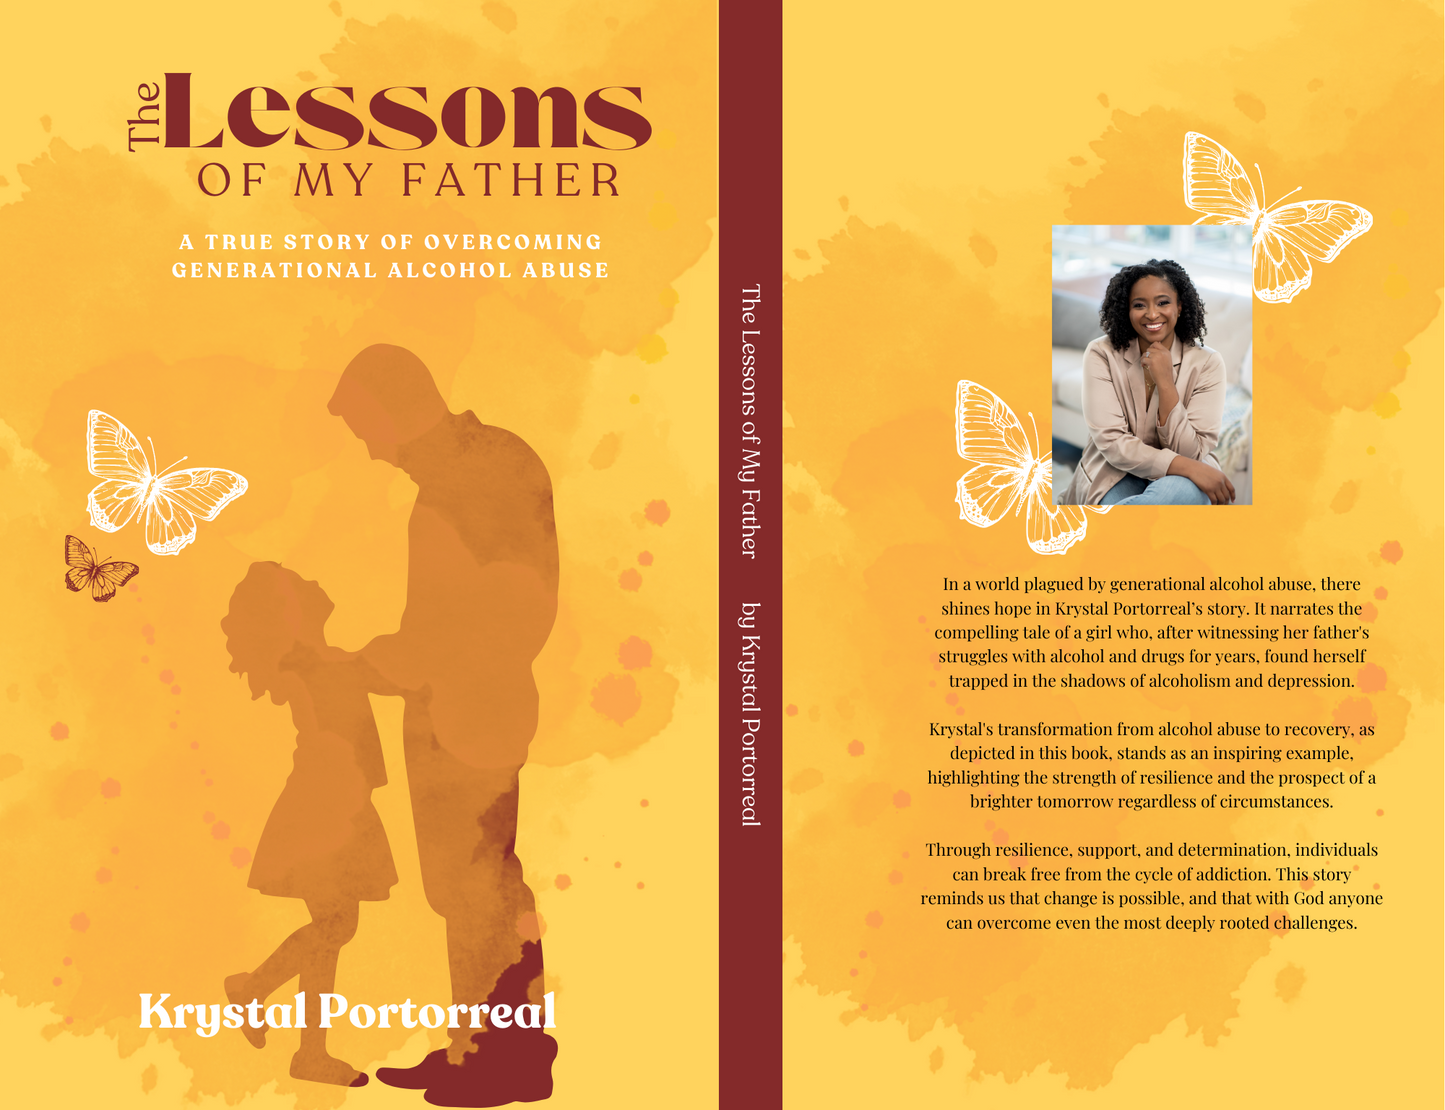 The Lessons of My Father